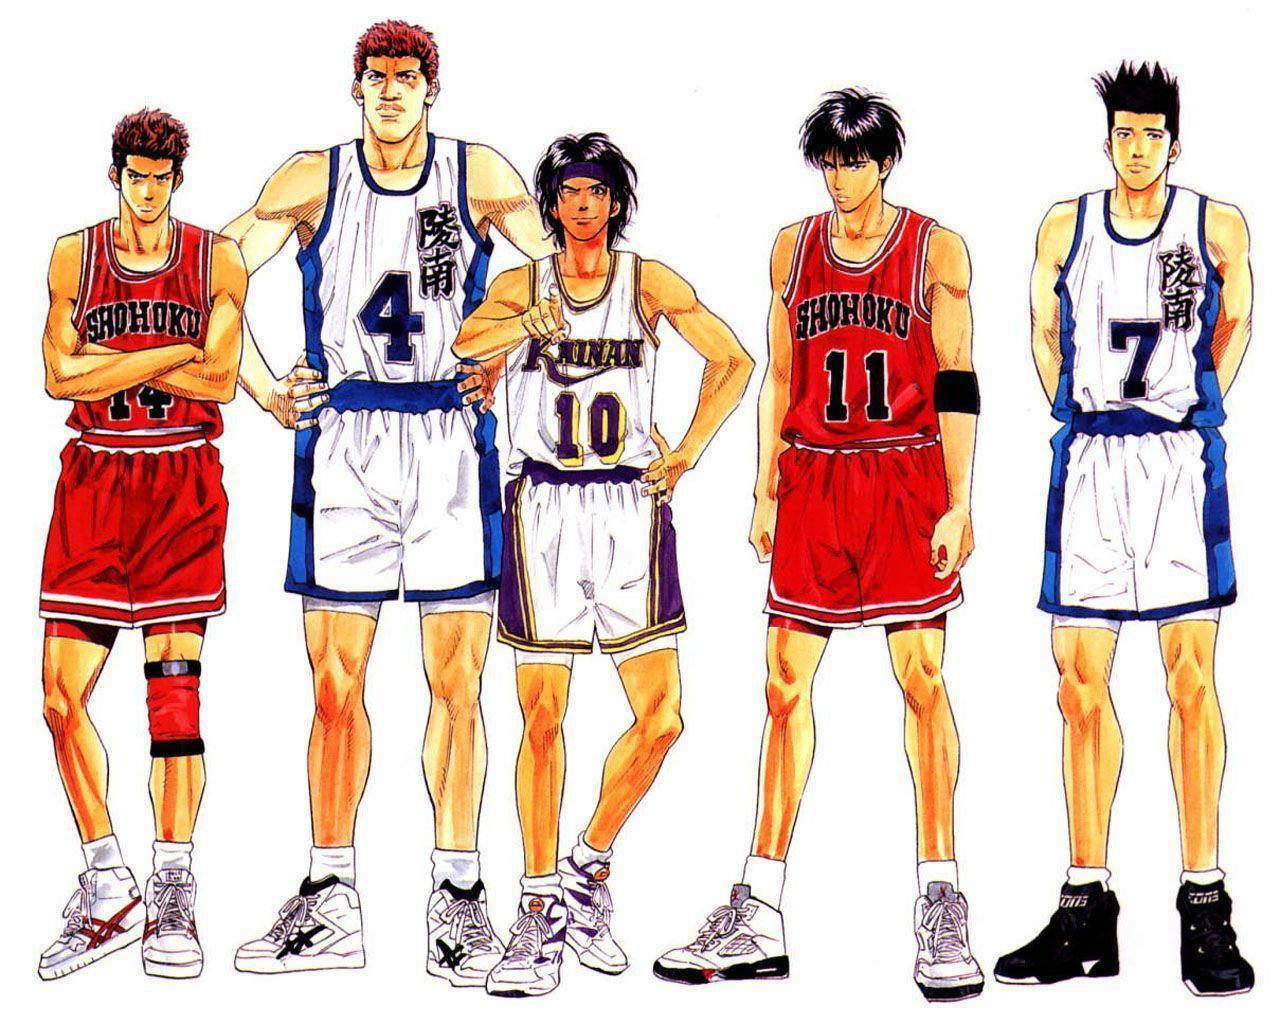 Wallpapers Android Slam Dunk 588 X 600 182 Kb Jpeg